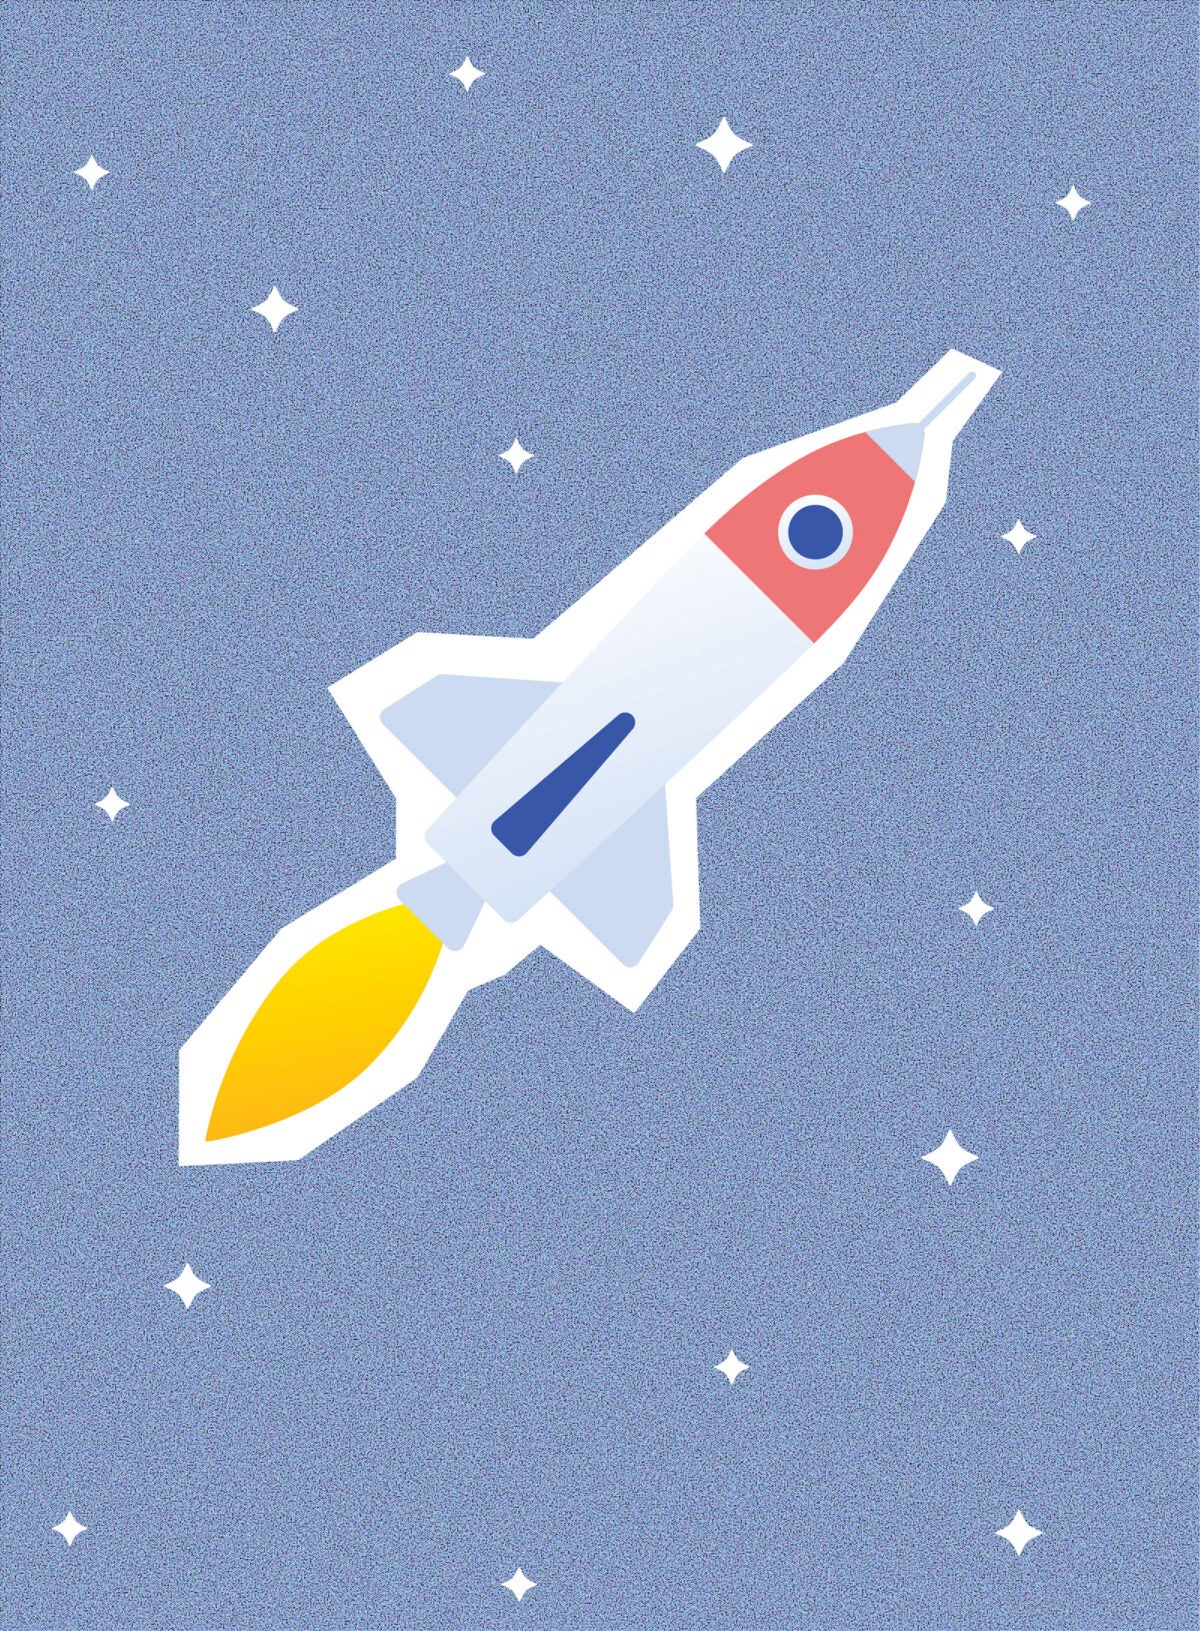 Illustration: A rocket-ship flies mid-air in a dark blue-speckled sky with white stars scattered around it. The rocket is blue-silver in color and has a rose nose section and yellow flame out of its exhaust.